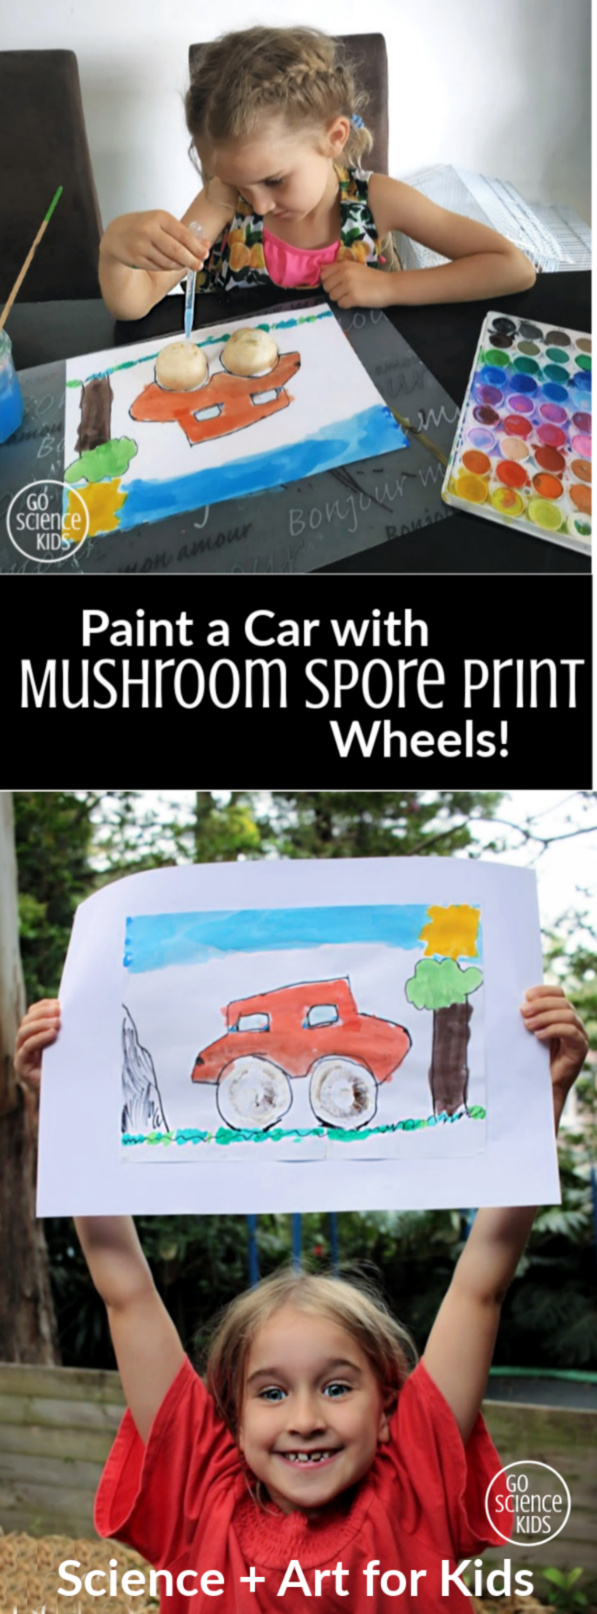 Paint a car with mushroom spore print wheels - fun art + science activity for kids